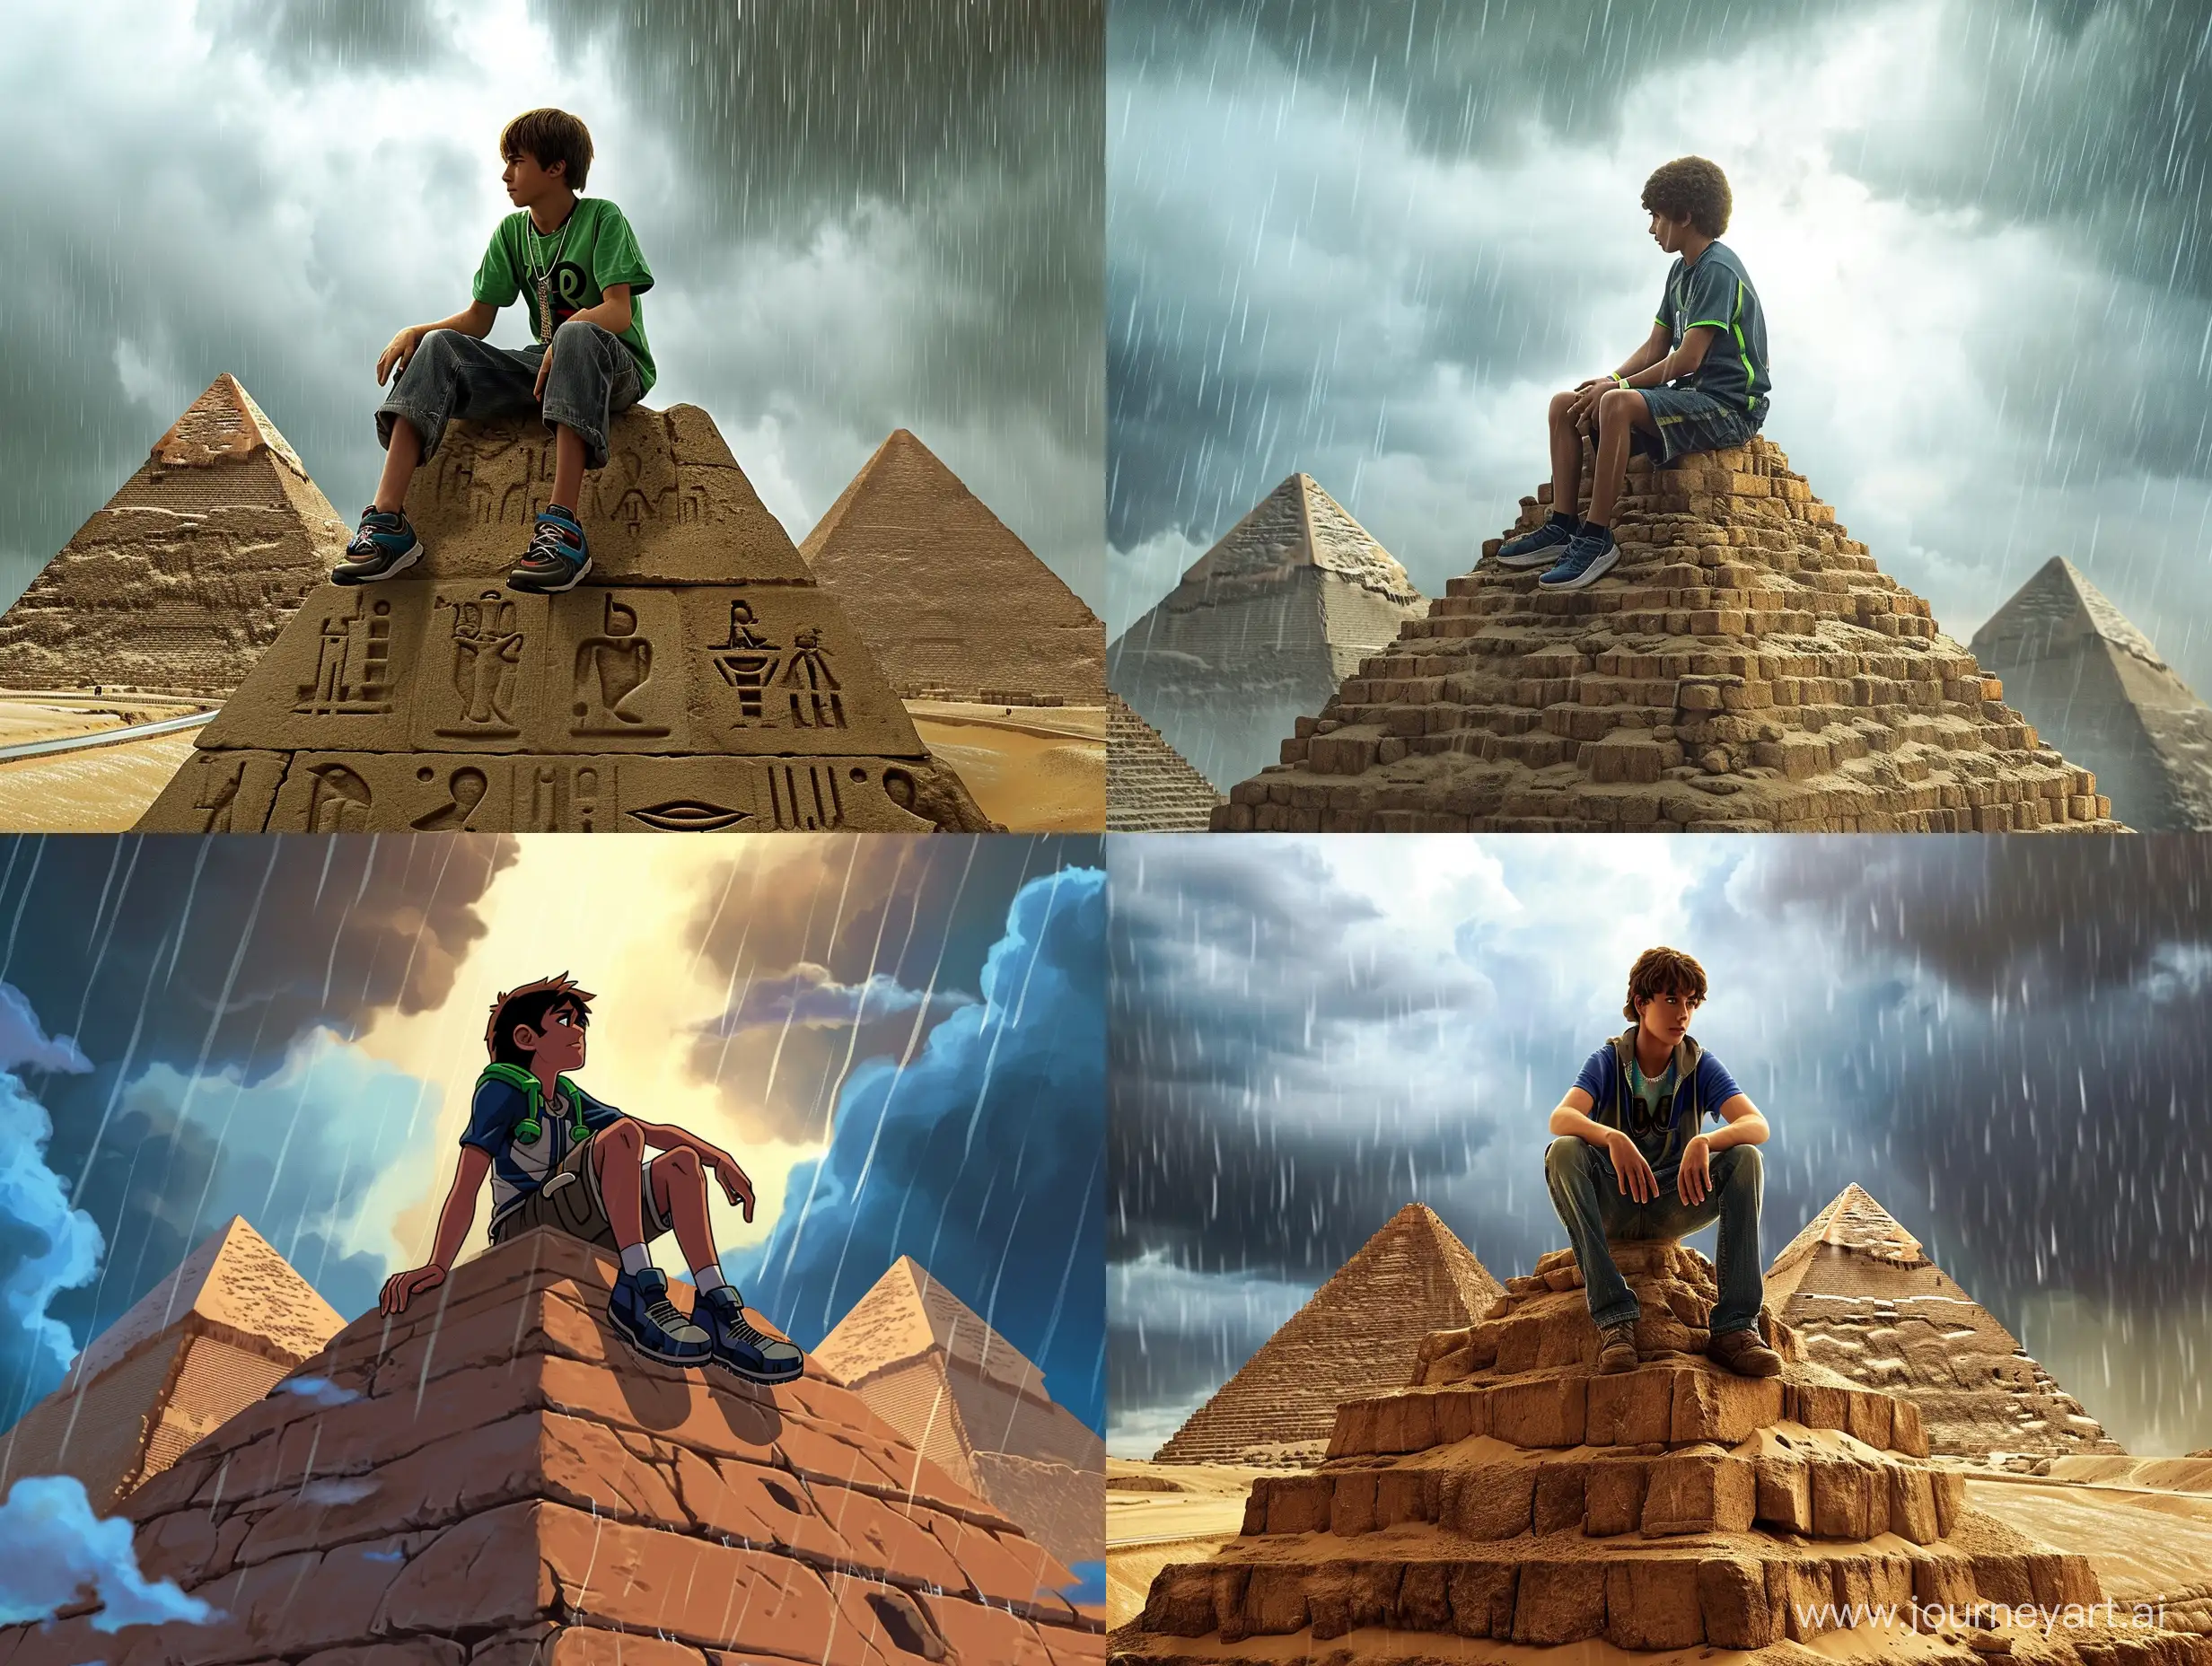 kevin levin from ben 10 sitting on top of the egyptian pyramids while sky is raining 